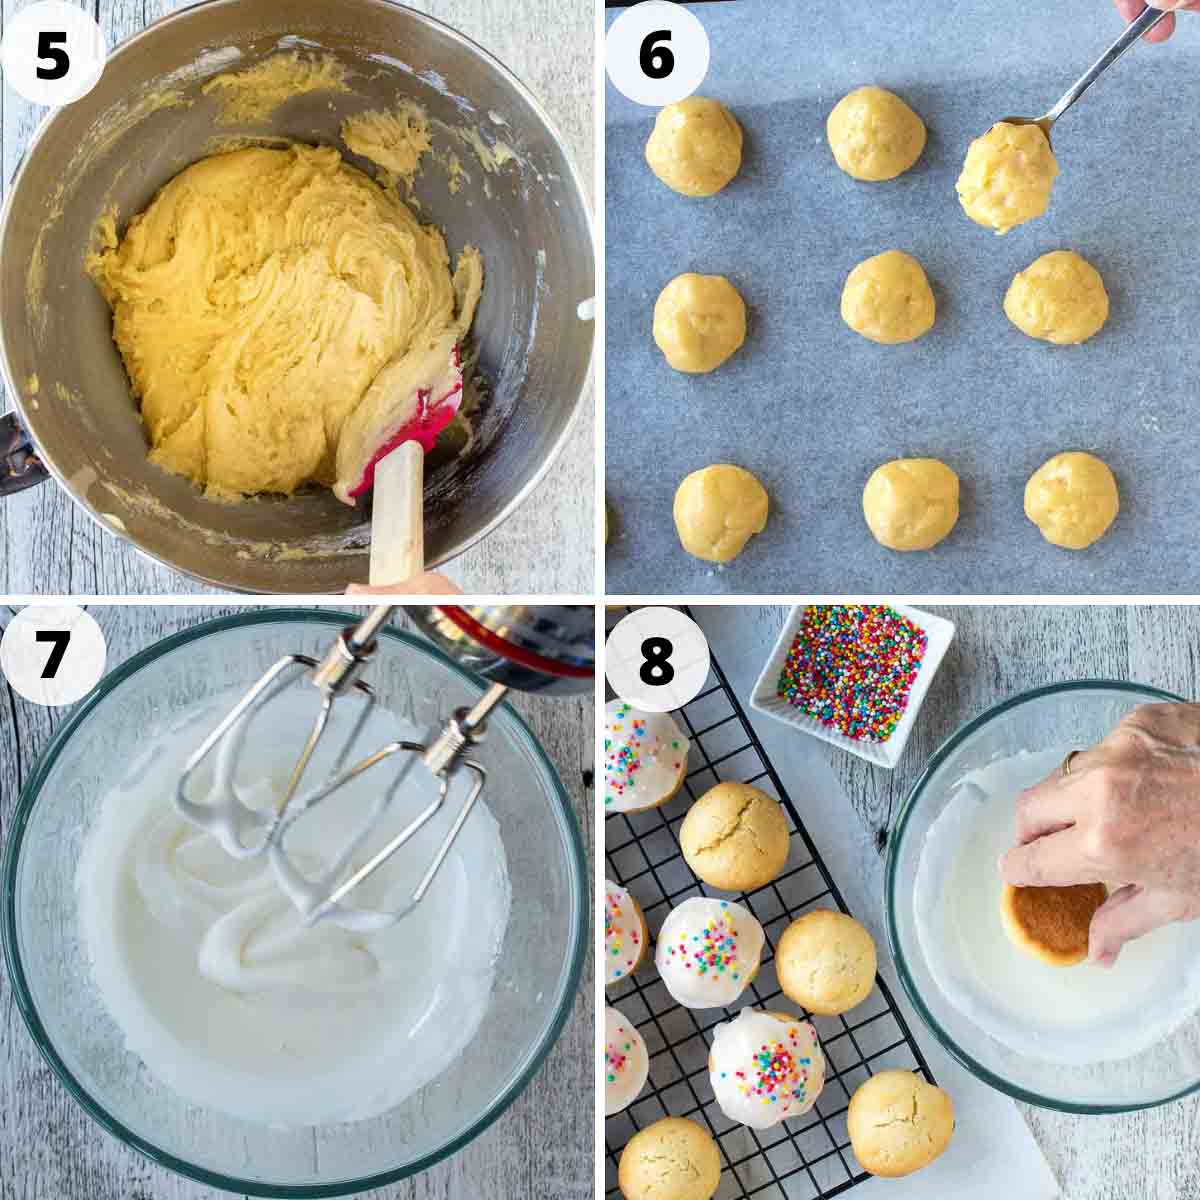 Four step process showing how to shape and decorate these cookies.